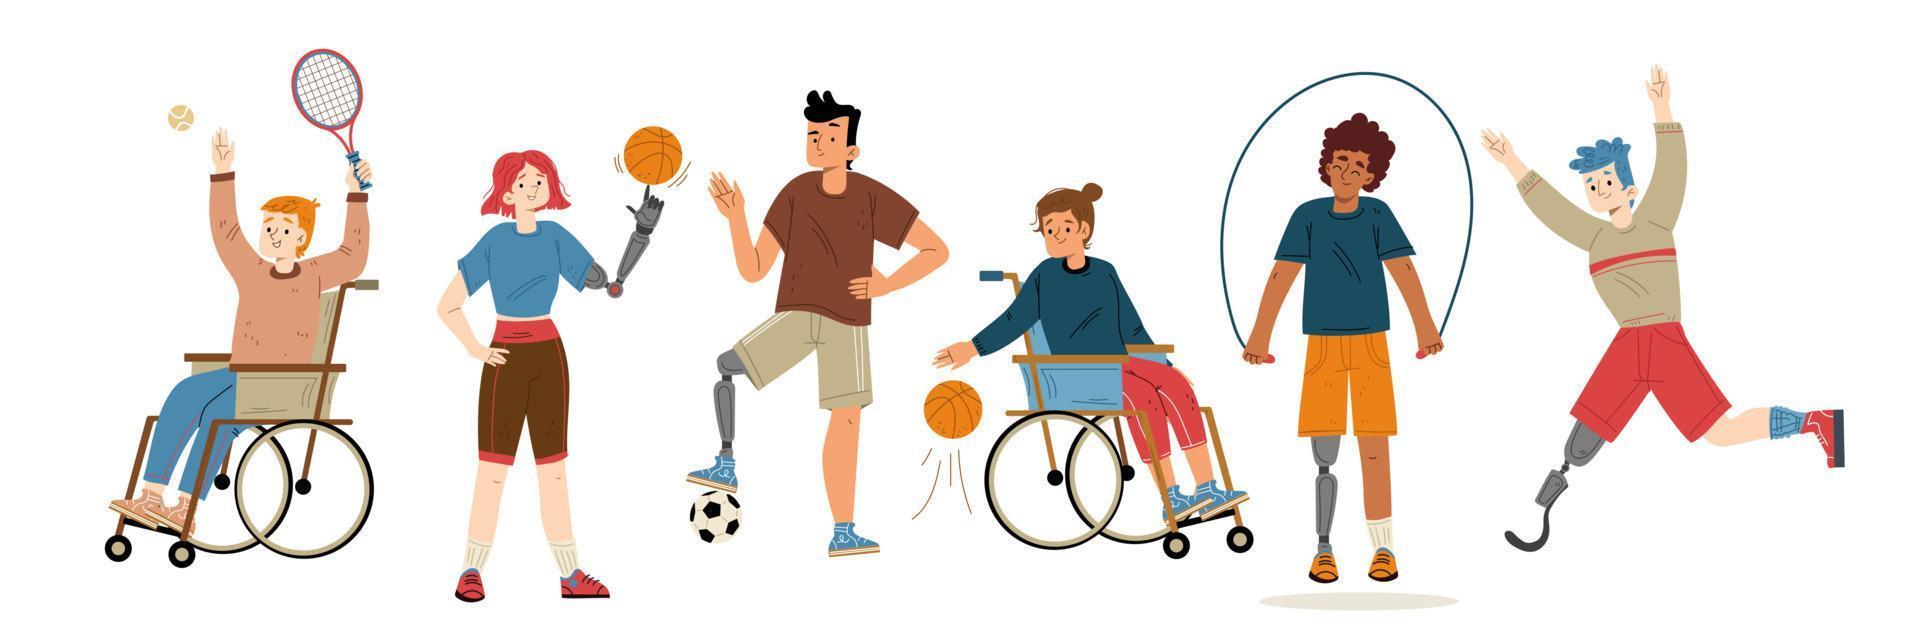 Sport athlete people with different disabilities vector